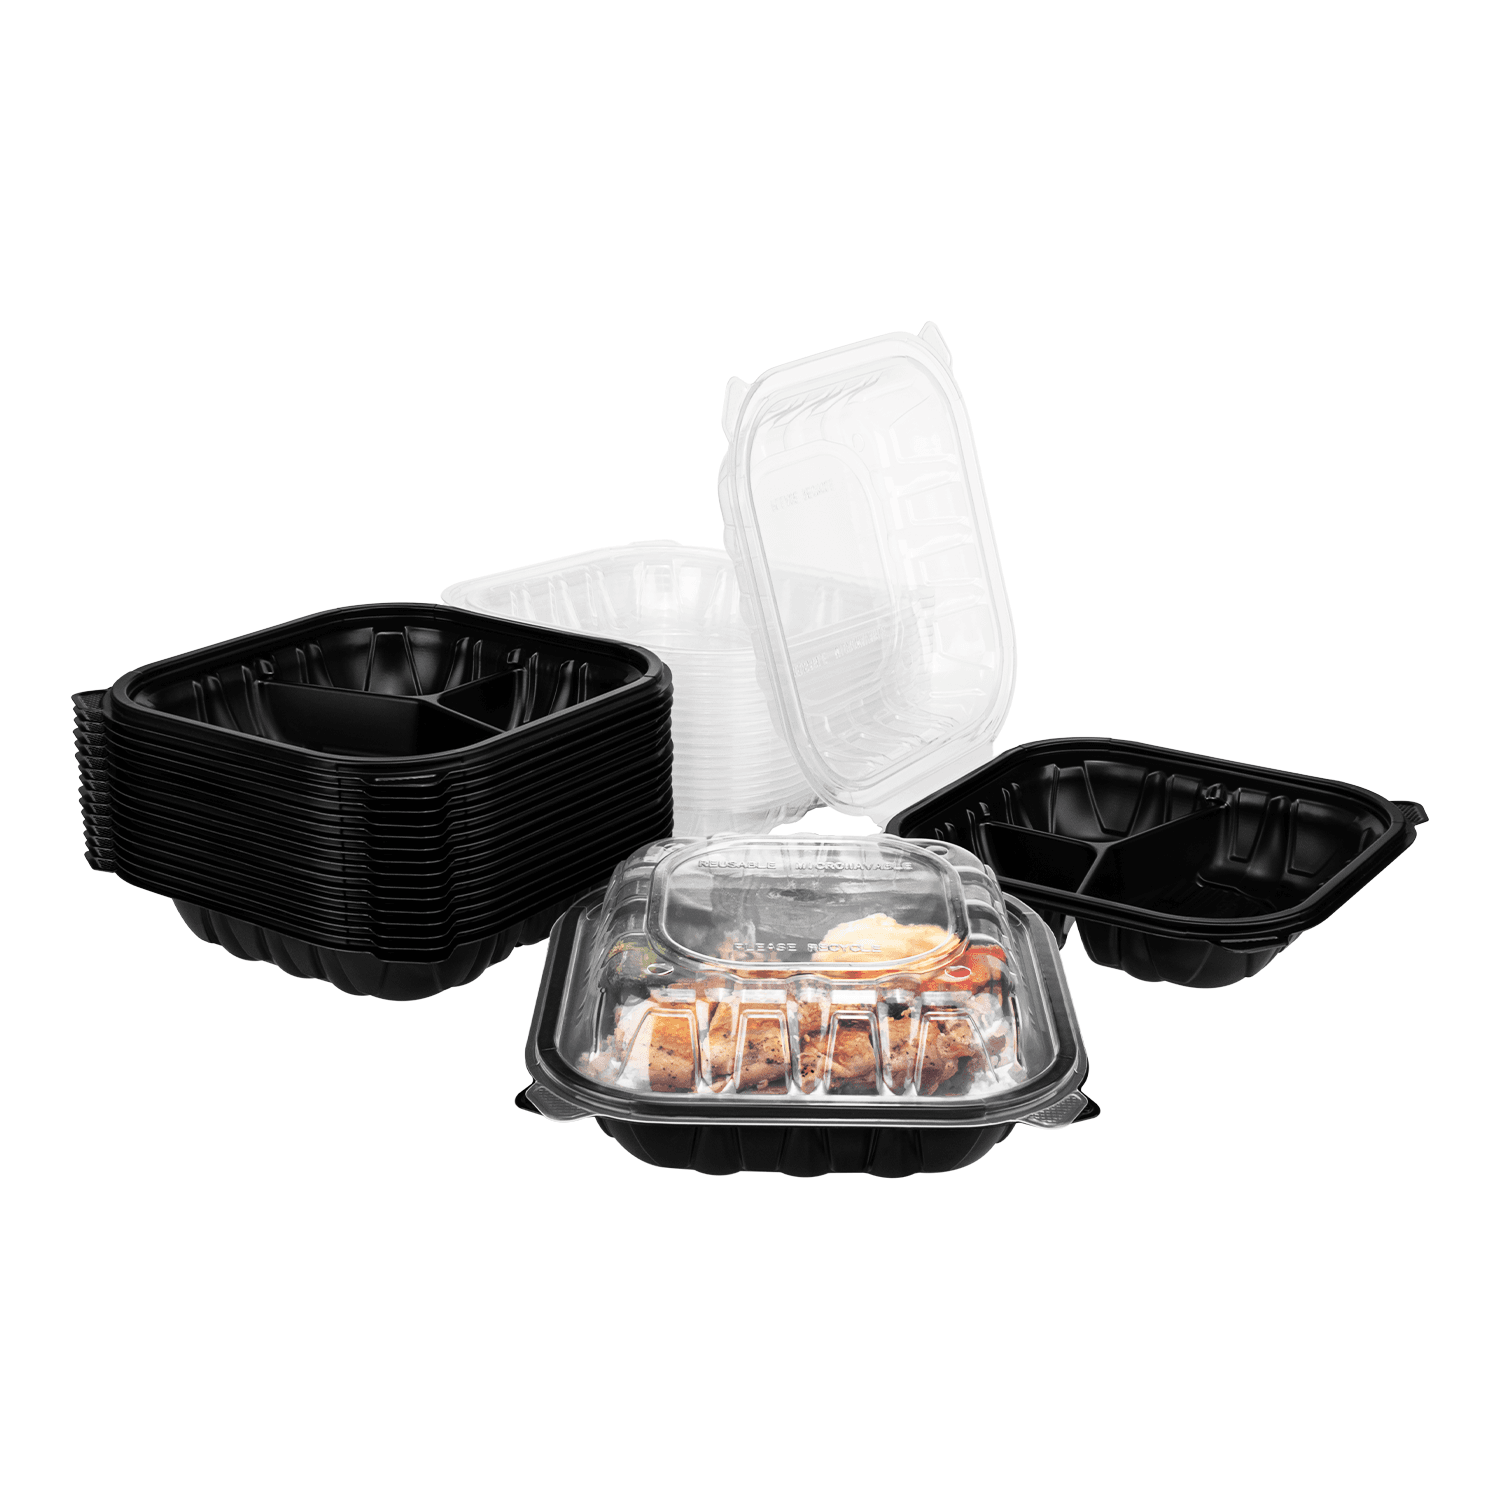 Karat 8"x 8" Premium PP Hinged Container with 3 compartments